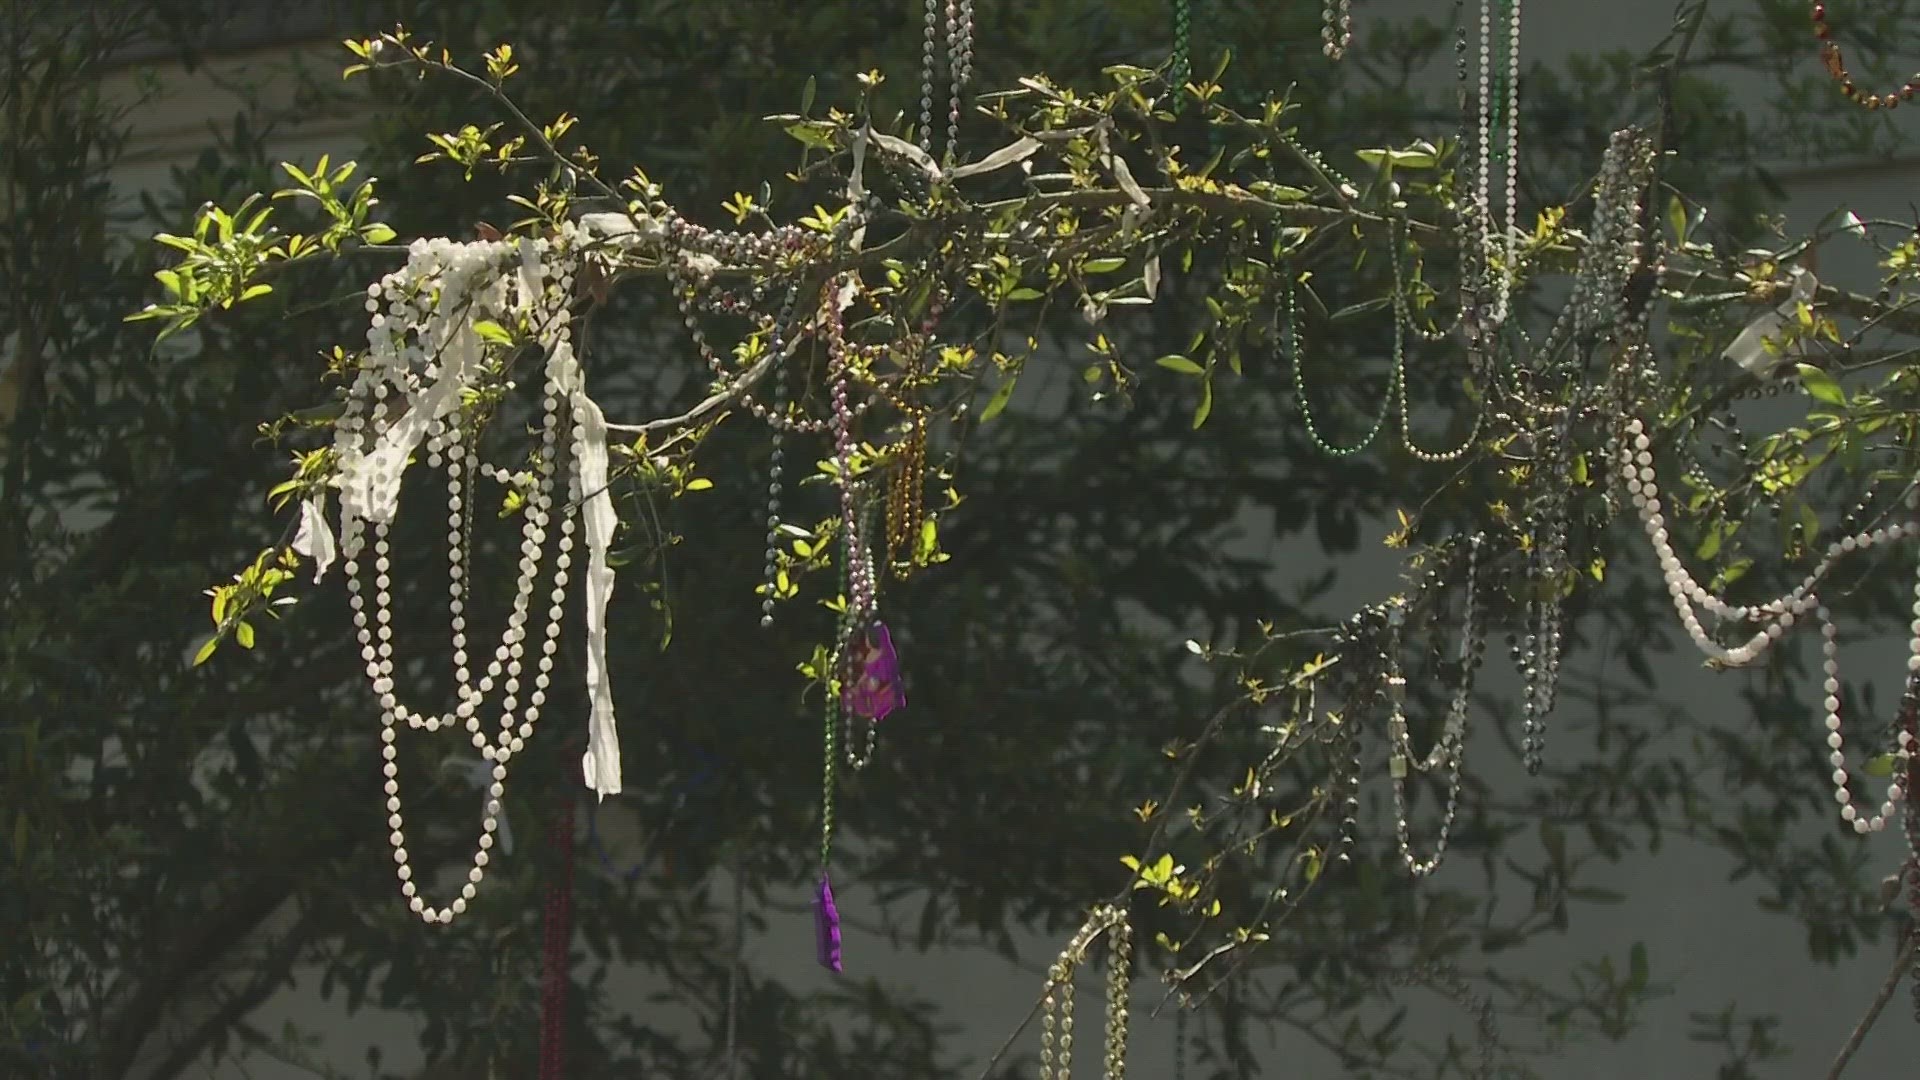 There may be toilet paper remnants and beads in the trees on St. Charles Avenue and some other popular parading streets.